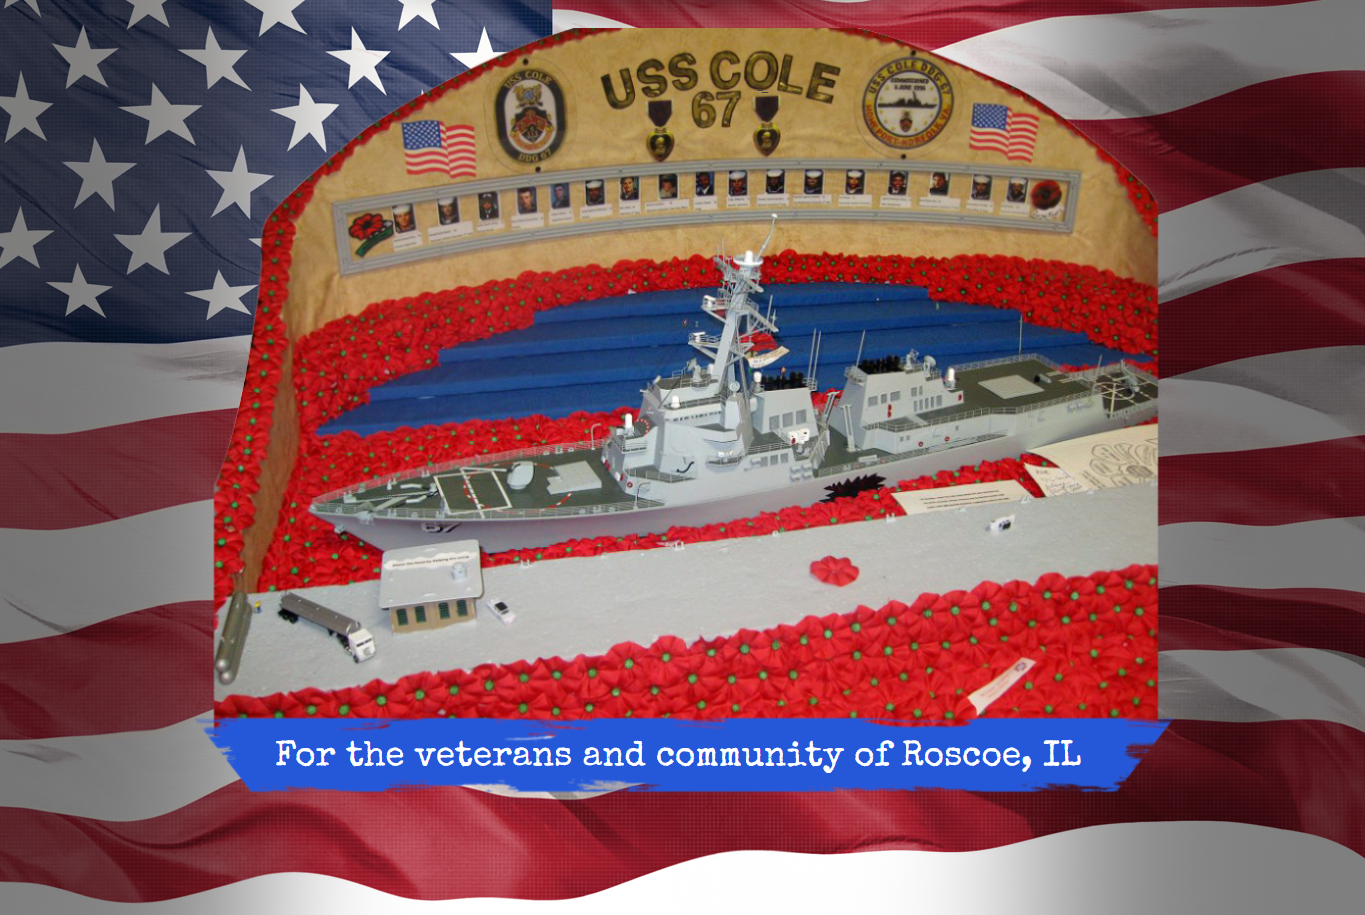 veterans and community of Roscoe, IL